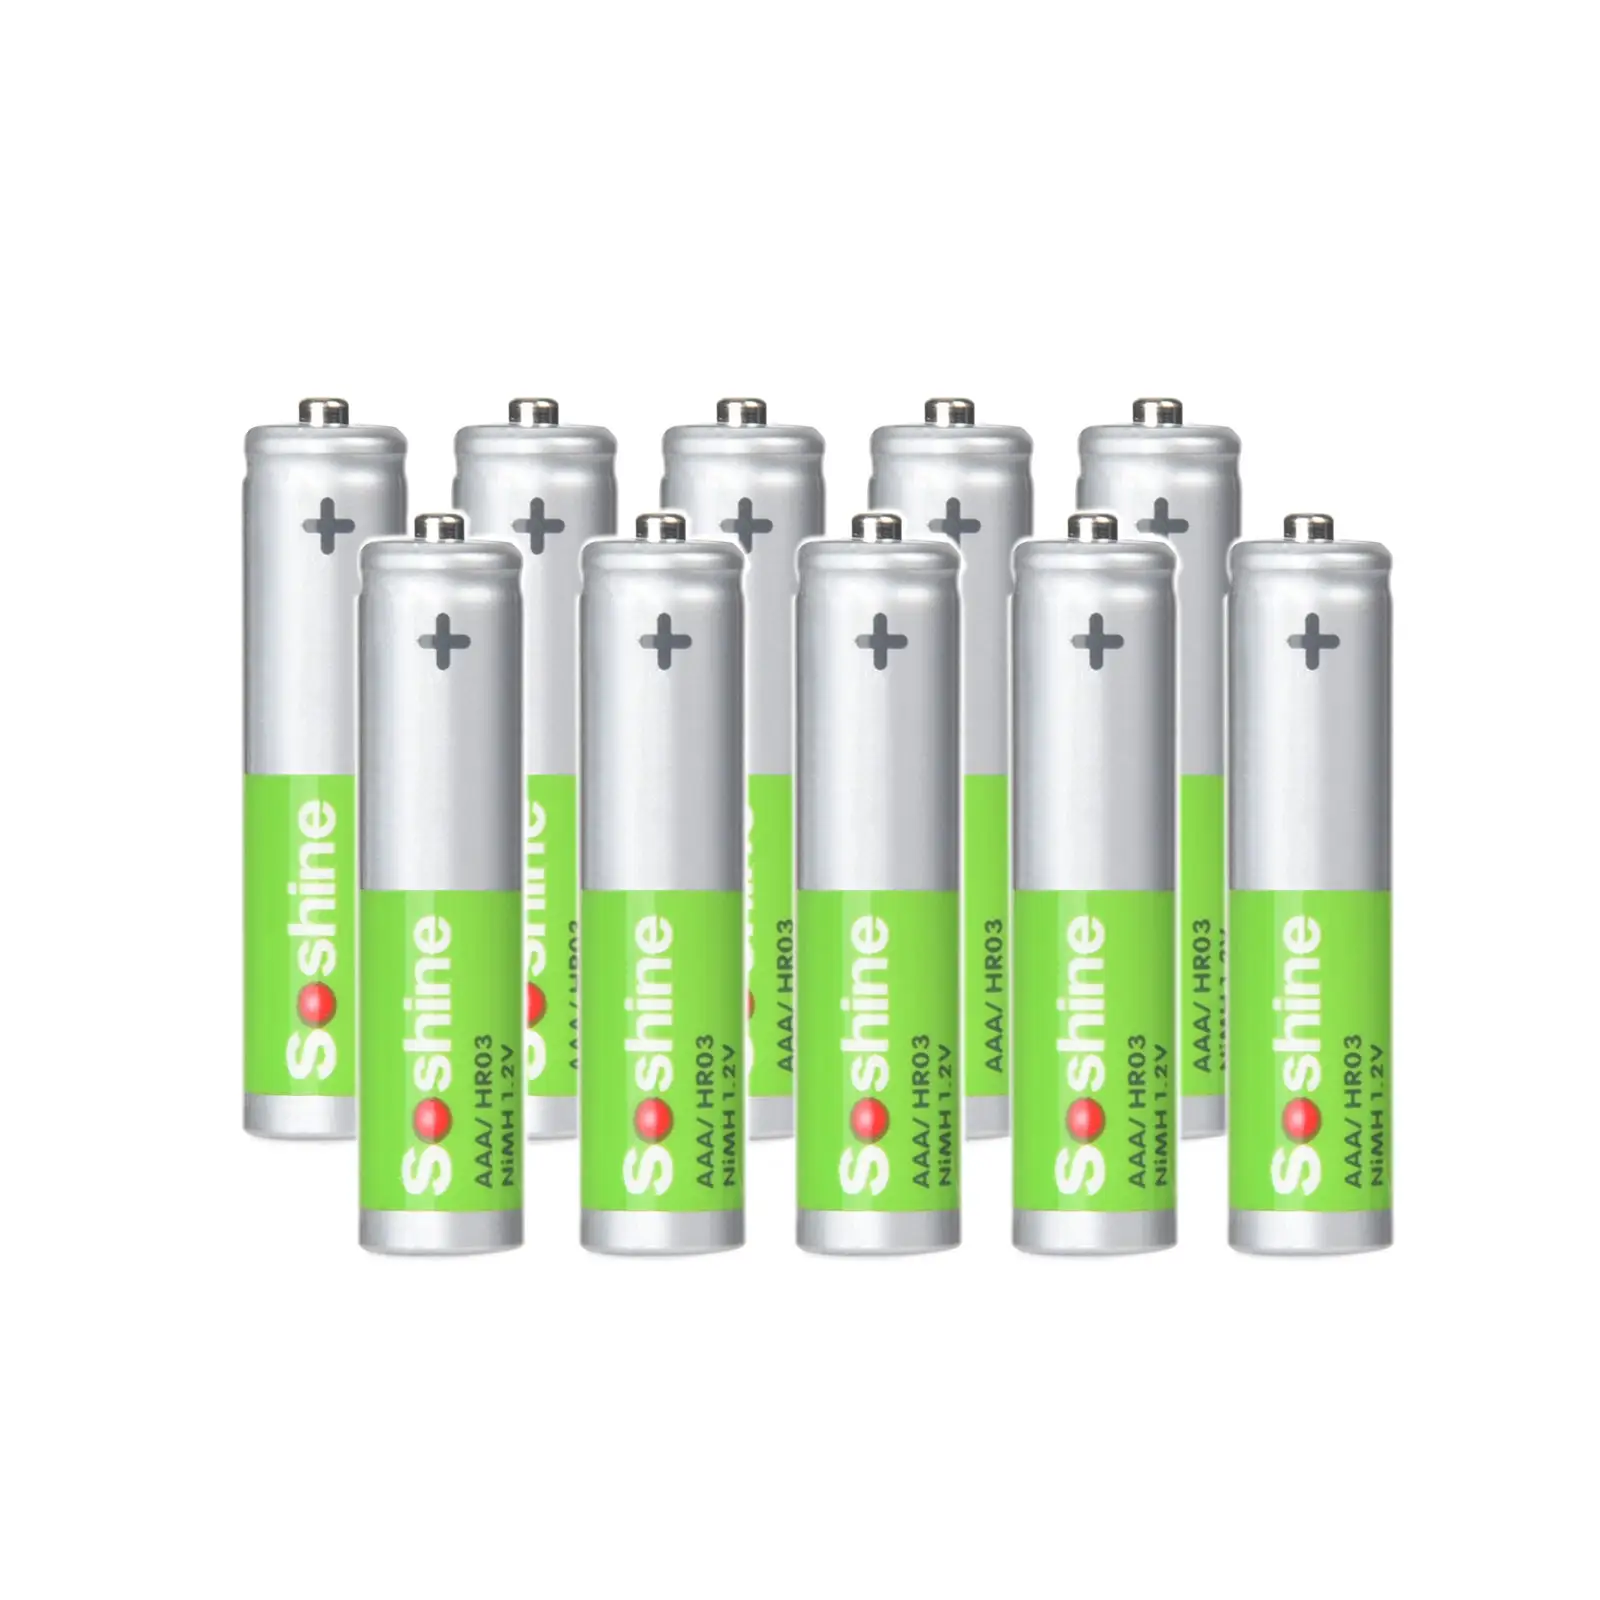 NiMH AAA 1.2V Rechargeable Battery for Torch Radios Toys: 500mAh - 10 Pack